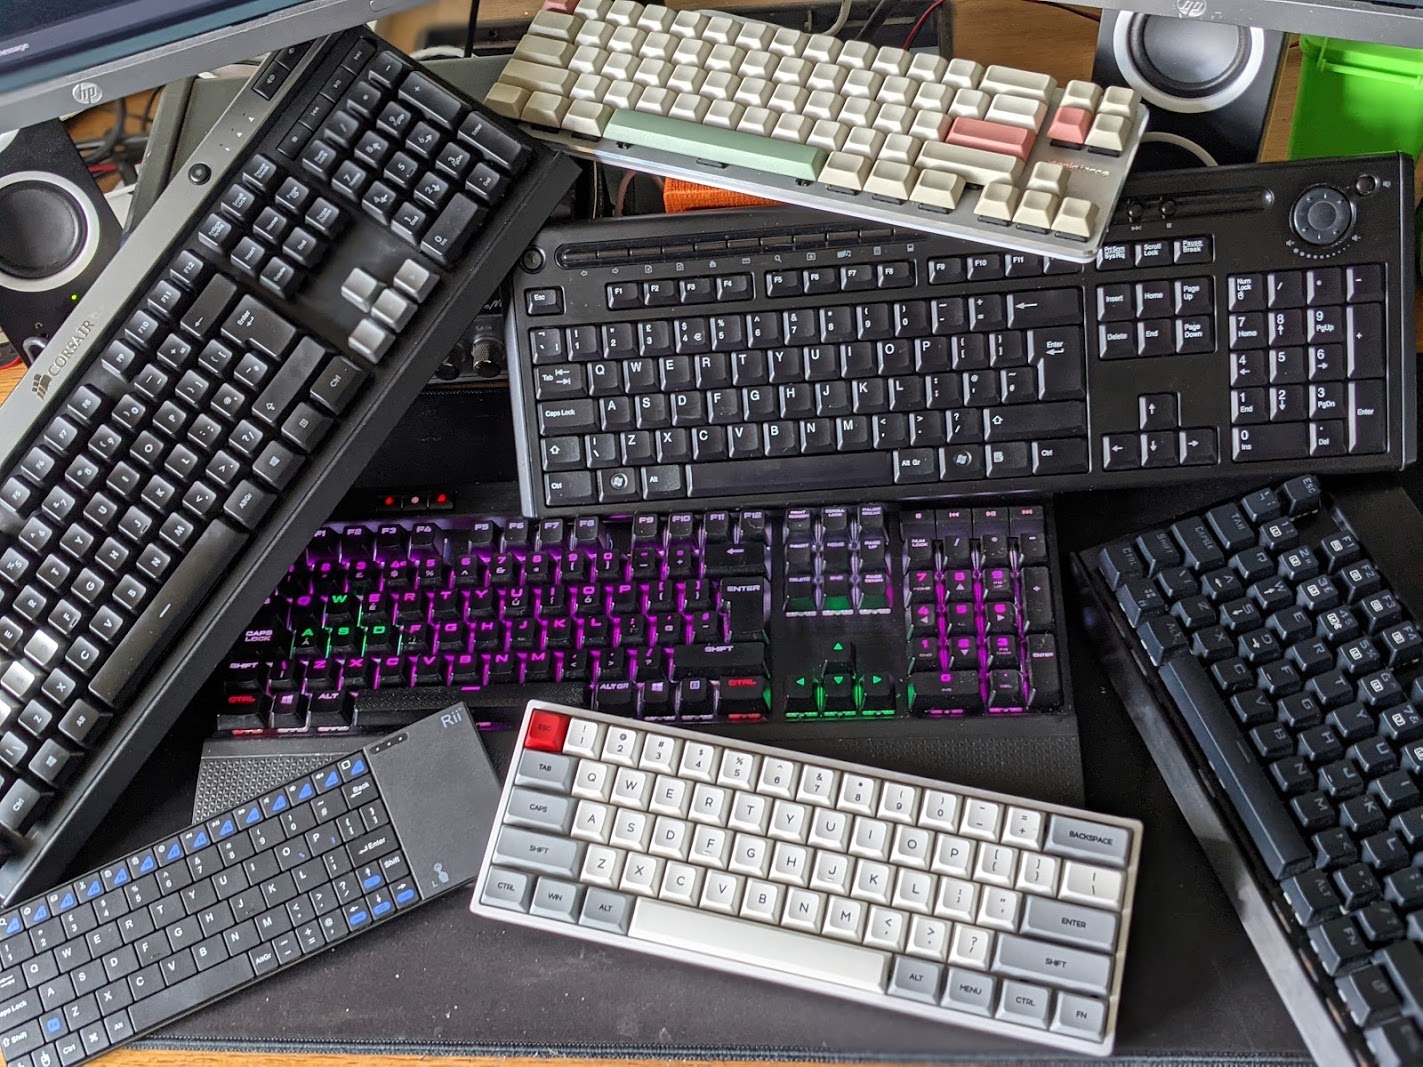 A big pile of keyboards